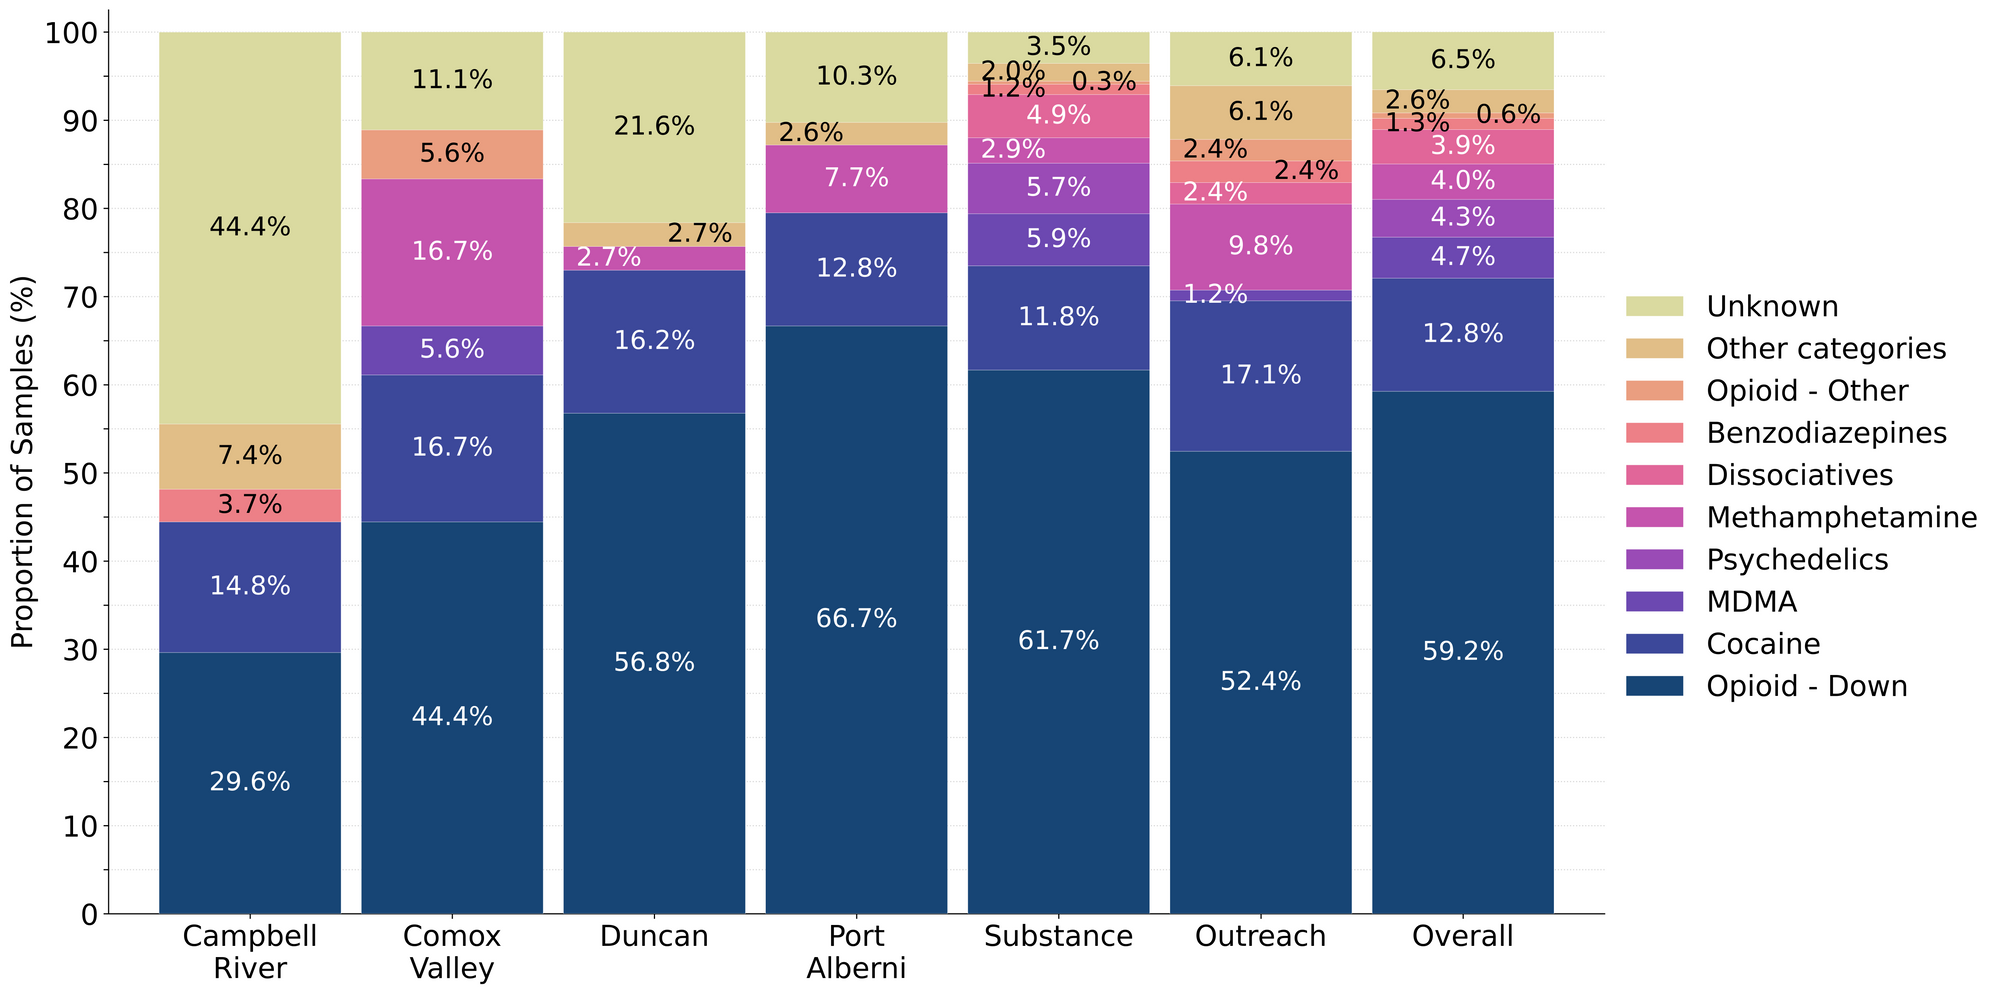 Figure 1. Prevalence of drug classes checked during April split by sample collection/method. Bars are stacked by the percentage of samples in each drug class.